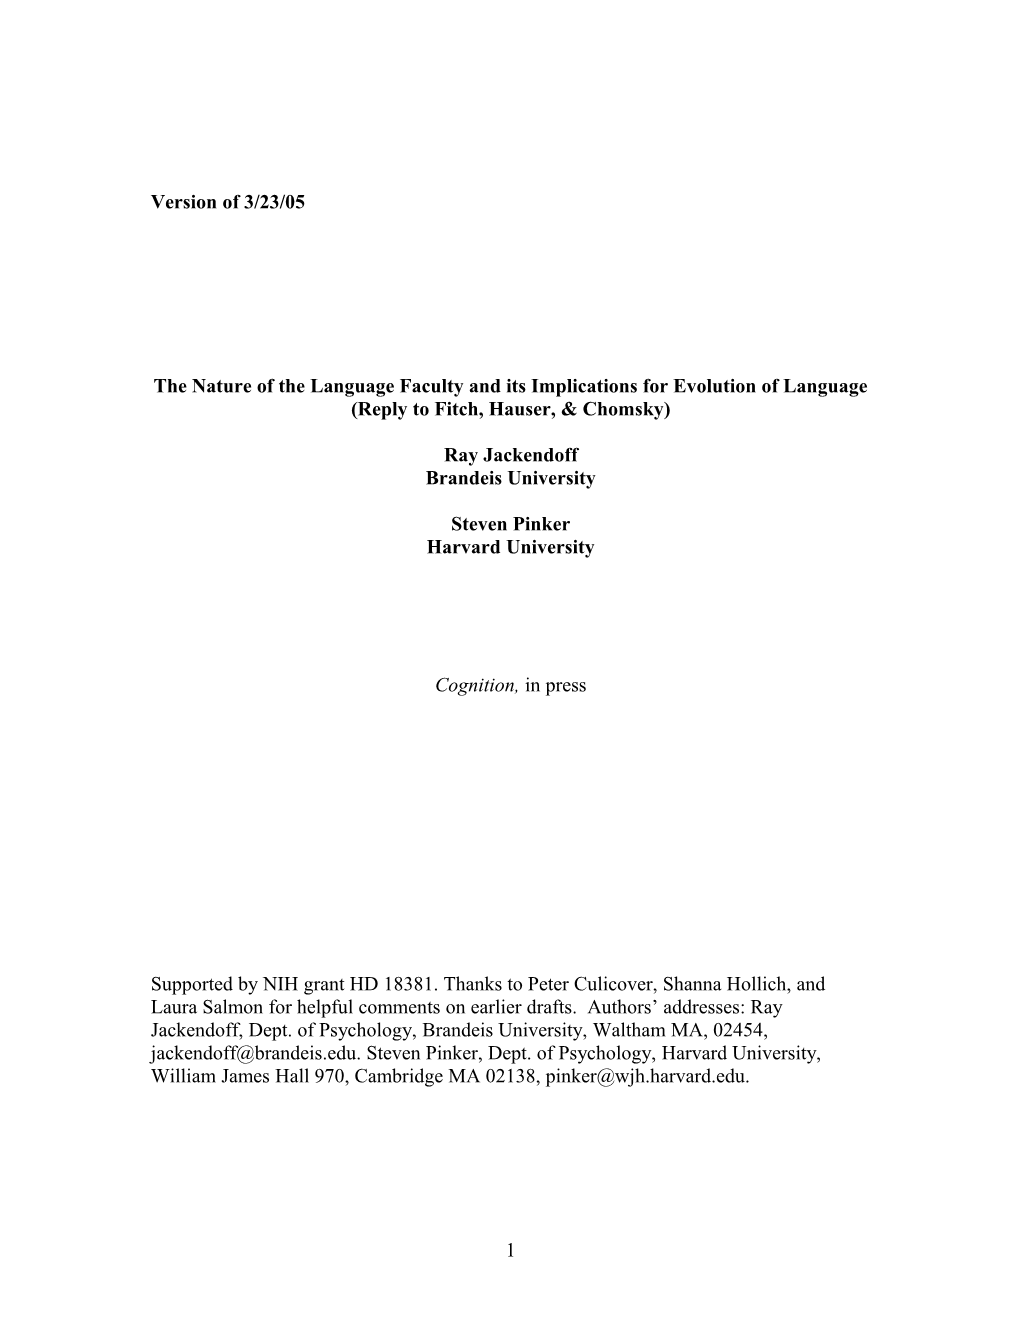 The Nature of the Language Faculty and Its Implications for Evolution of Language